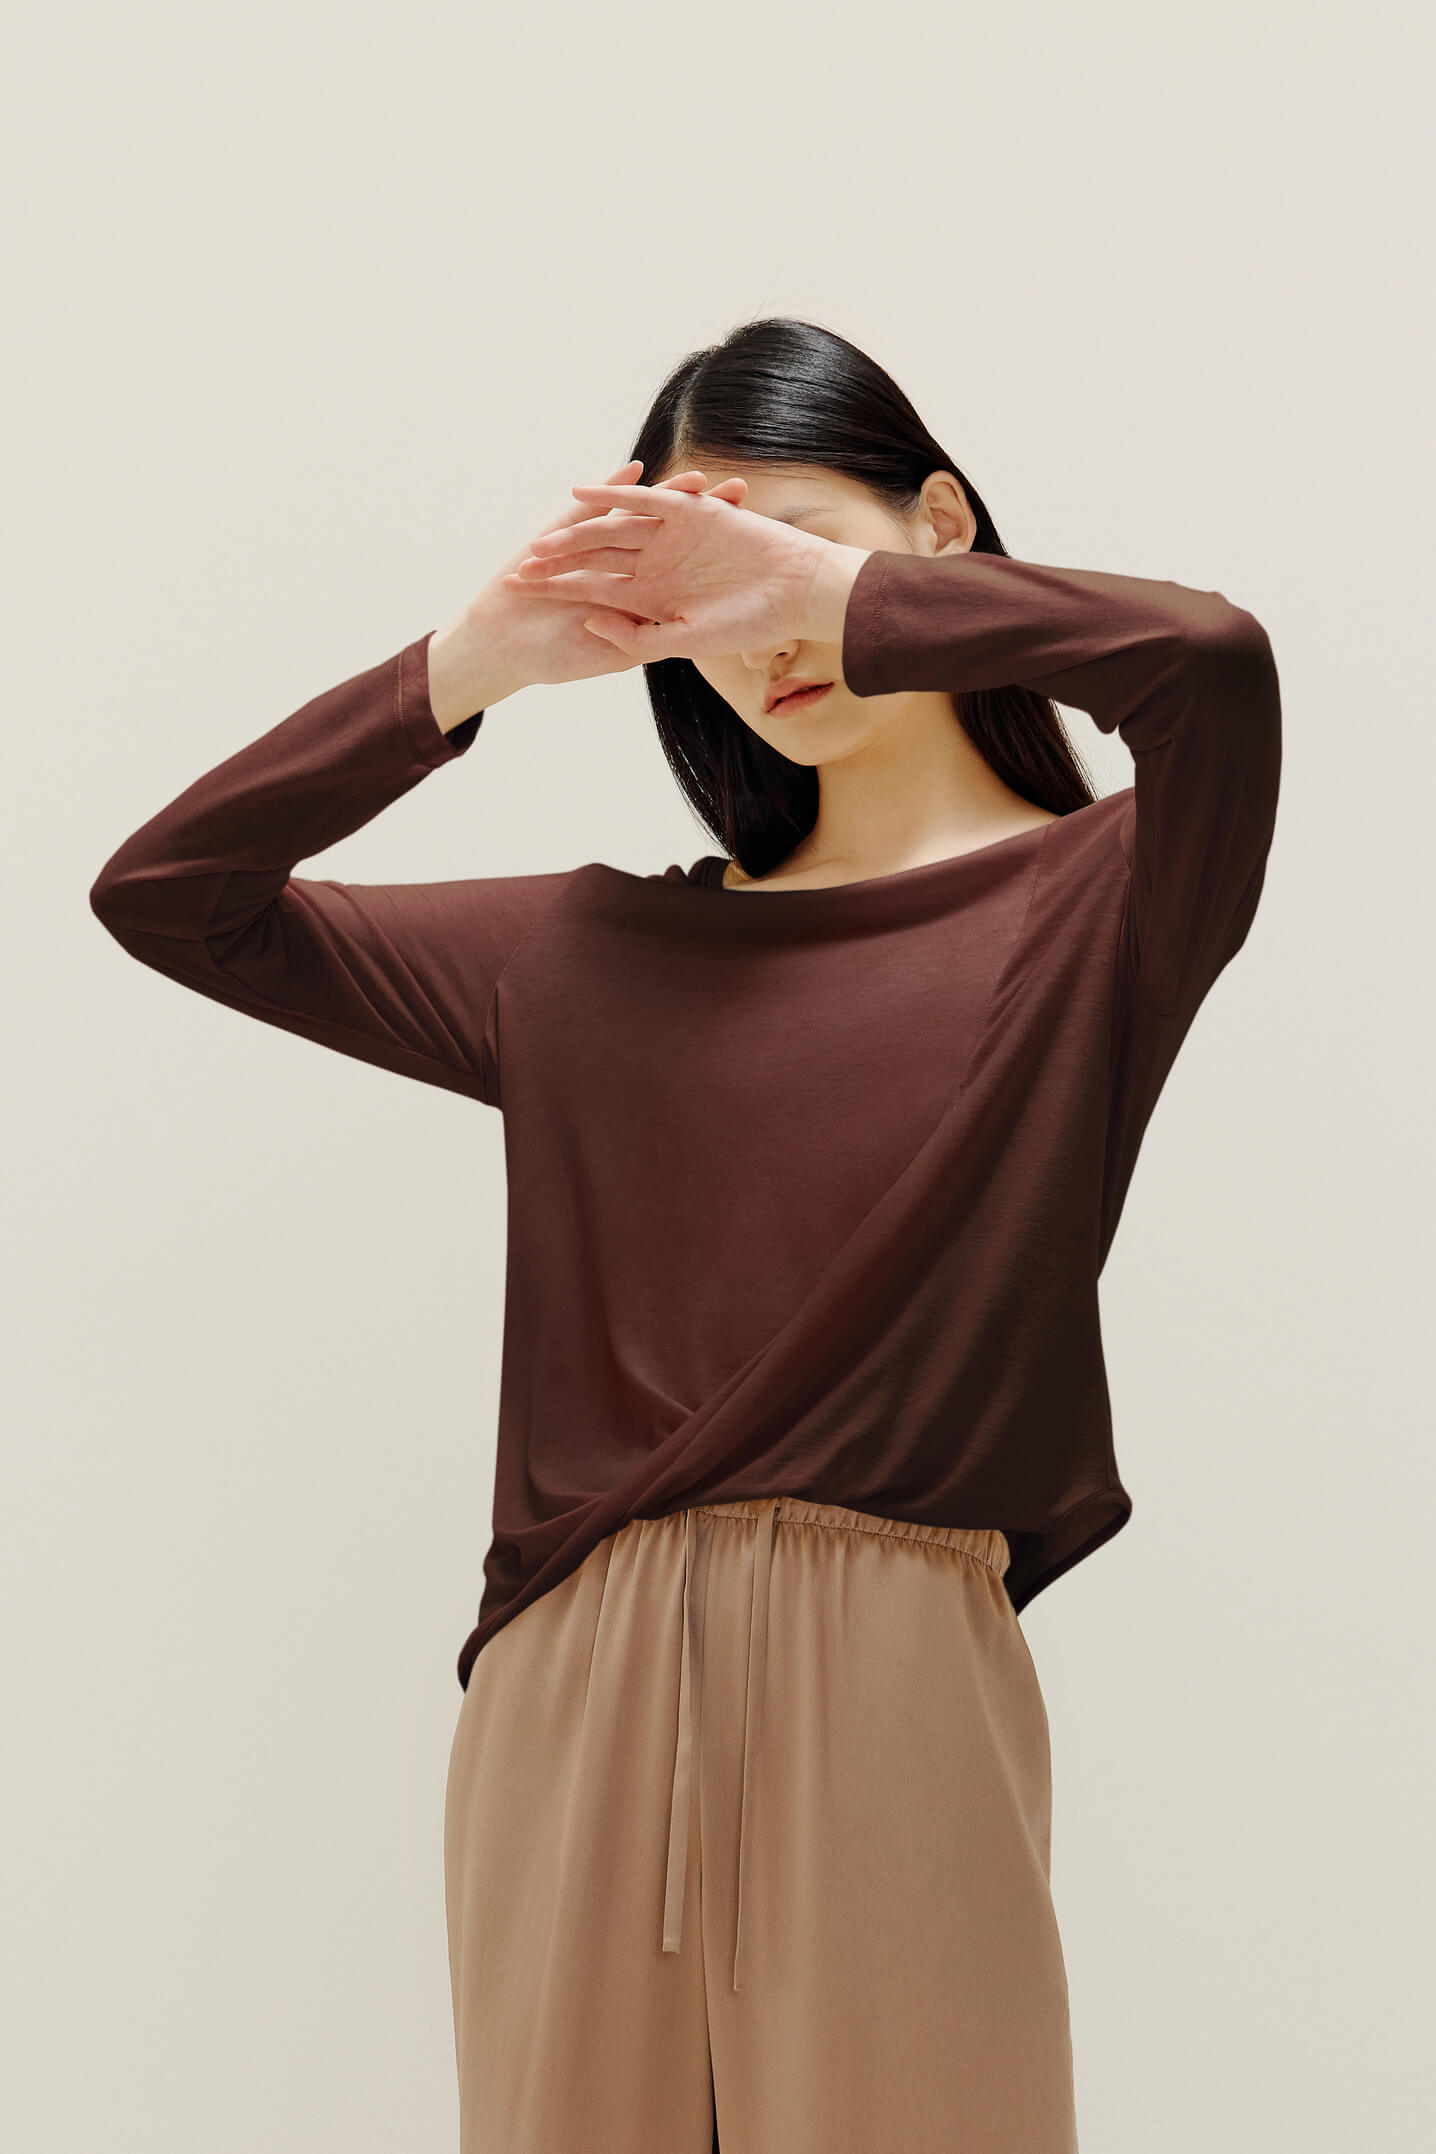 A woman wears a brown sweater and beige  pants